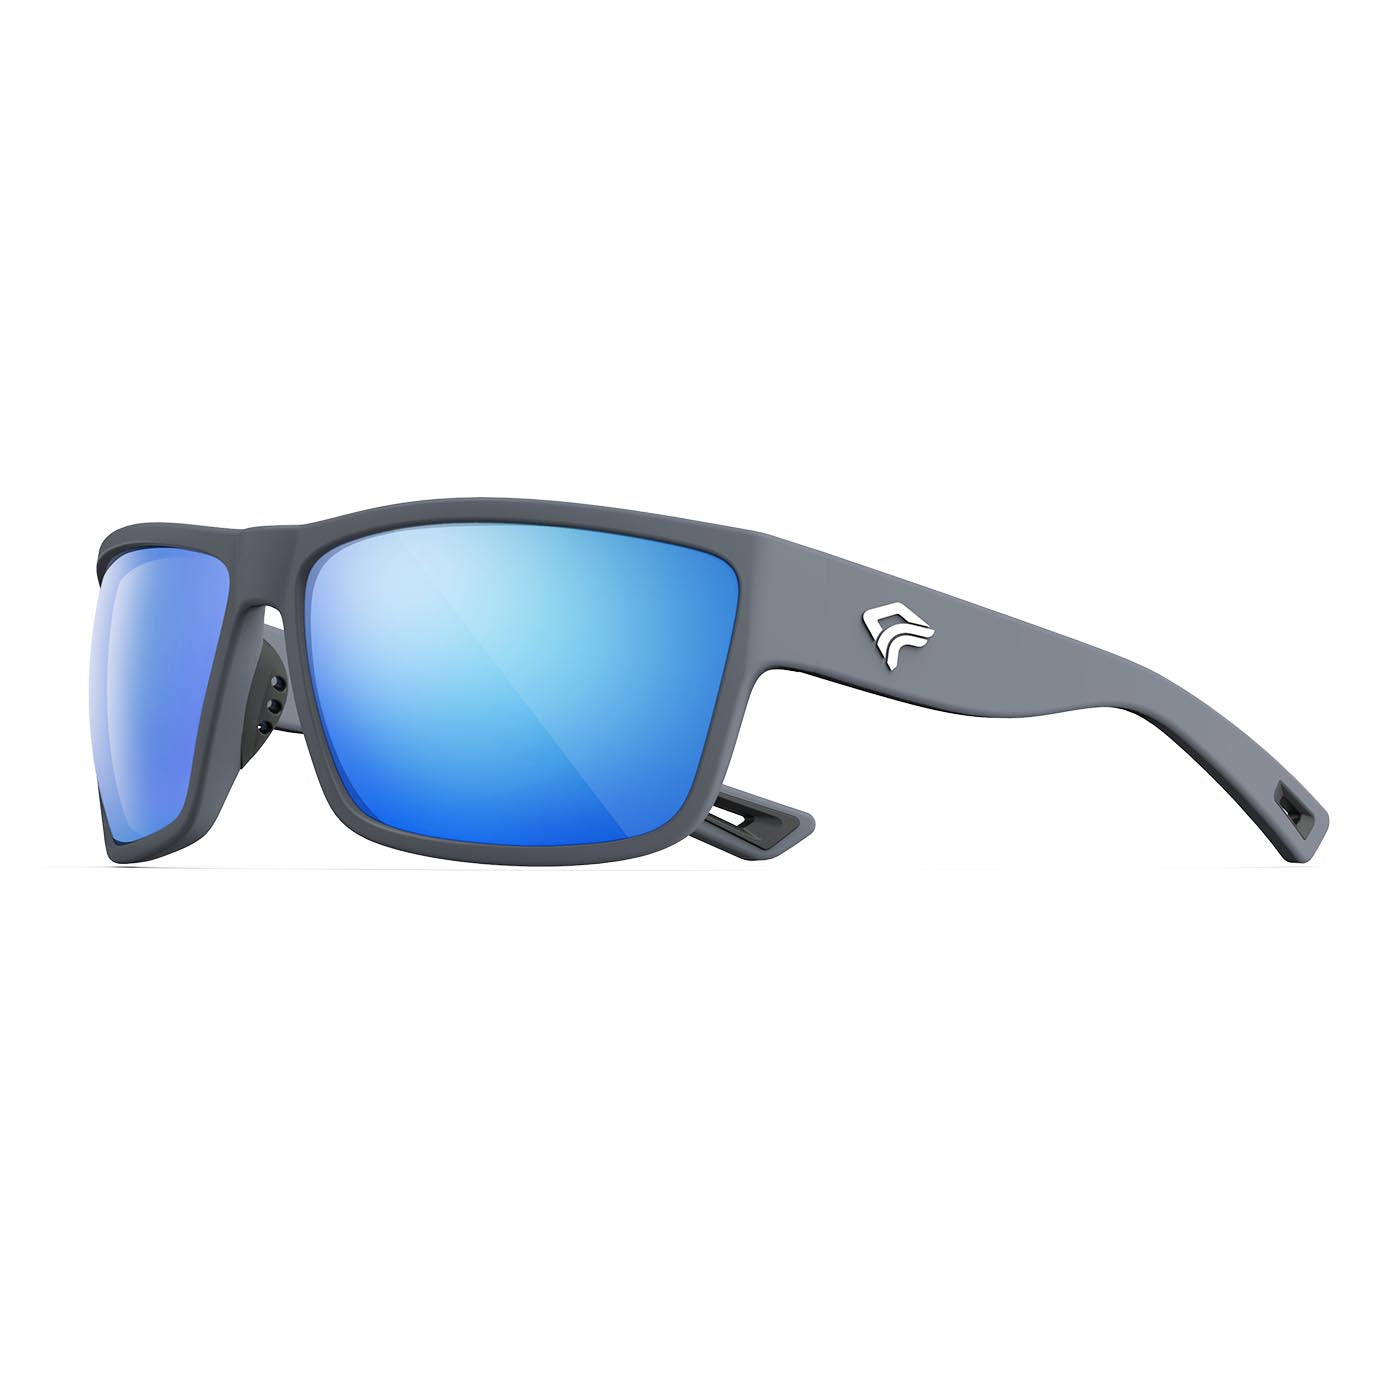 Frame Warranty Ideal Grey Polarized To Cycling, and with - Men Transparent - Flexible Adjustable Ideal Lifetime Pure Matte Sunglasses for and and Running, Women Fishing - Golf, Half Sports - for